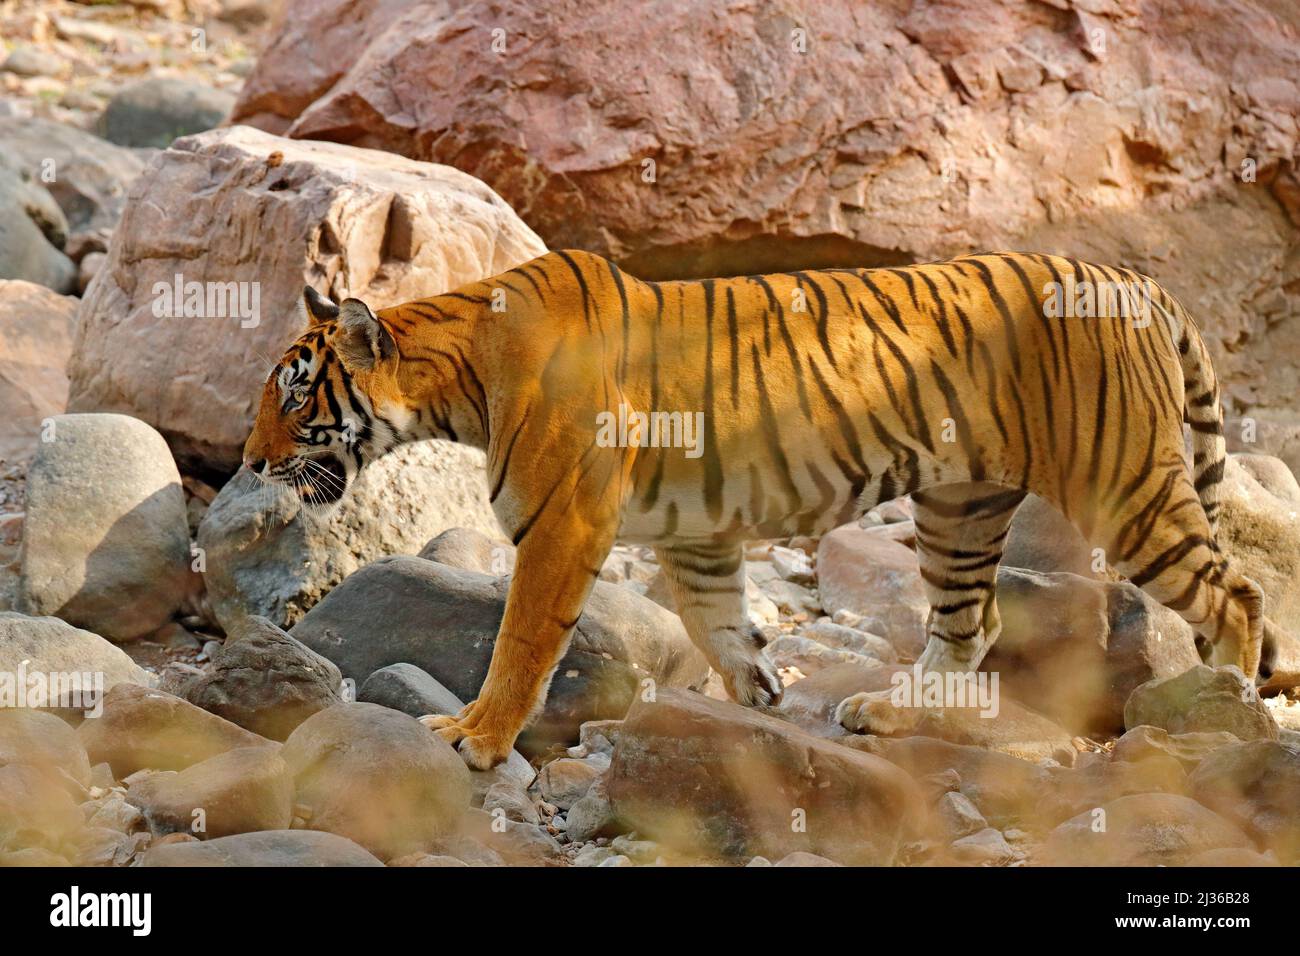 Tiger walking in stones. Wild Asia. Indian tiger with first rain, wild animal in the nature habitat, Ranthambore, India. Big cat, endangered animal. E Stock Photo